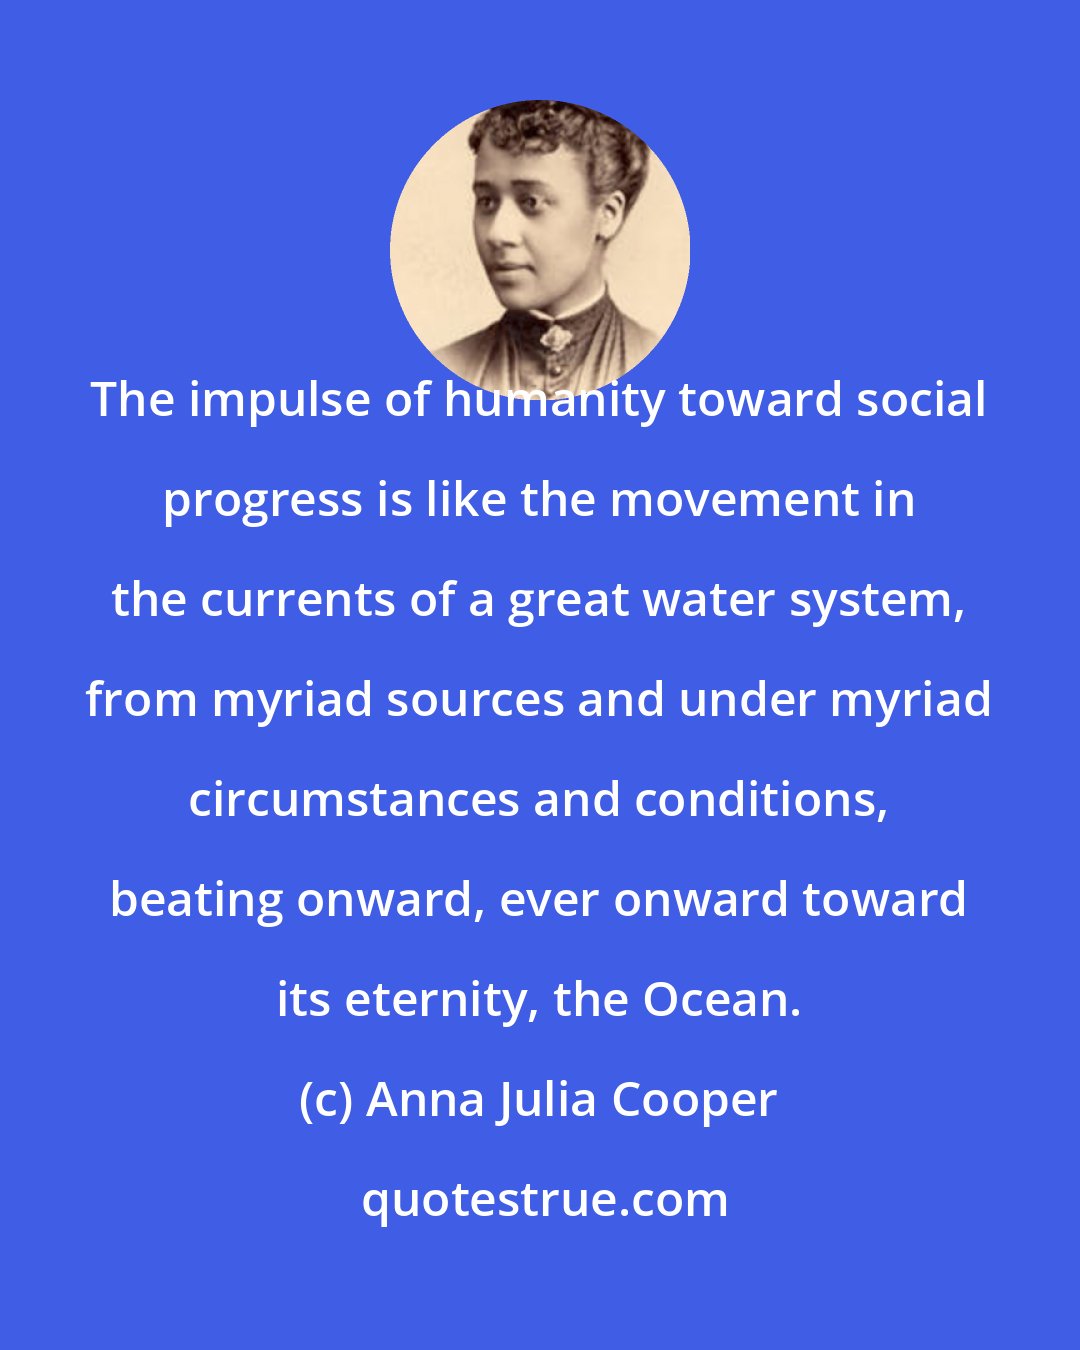 Anna Julia Cooper: The impulse of humanity toward social progress is like the movement in the currents of a great water system, from myriad sources and under myriad circumstances and conditions, beating onward, ever onward toward its eternity, the Ocean.